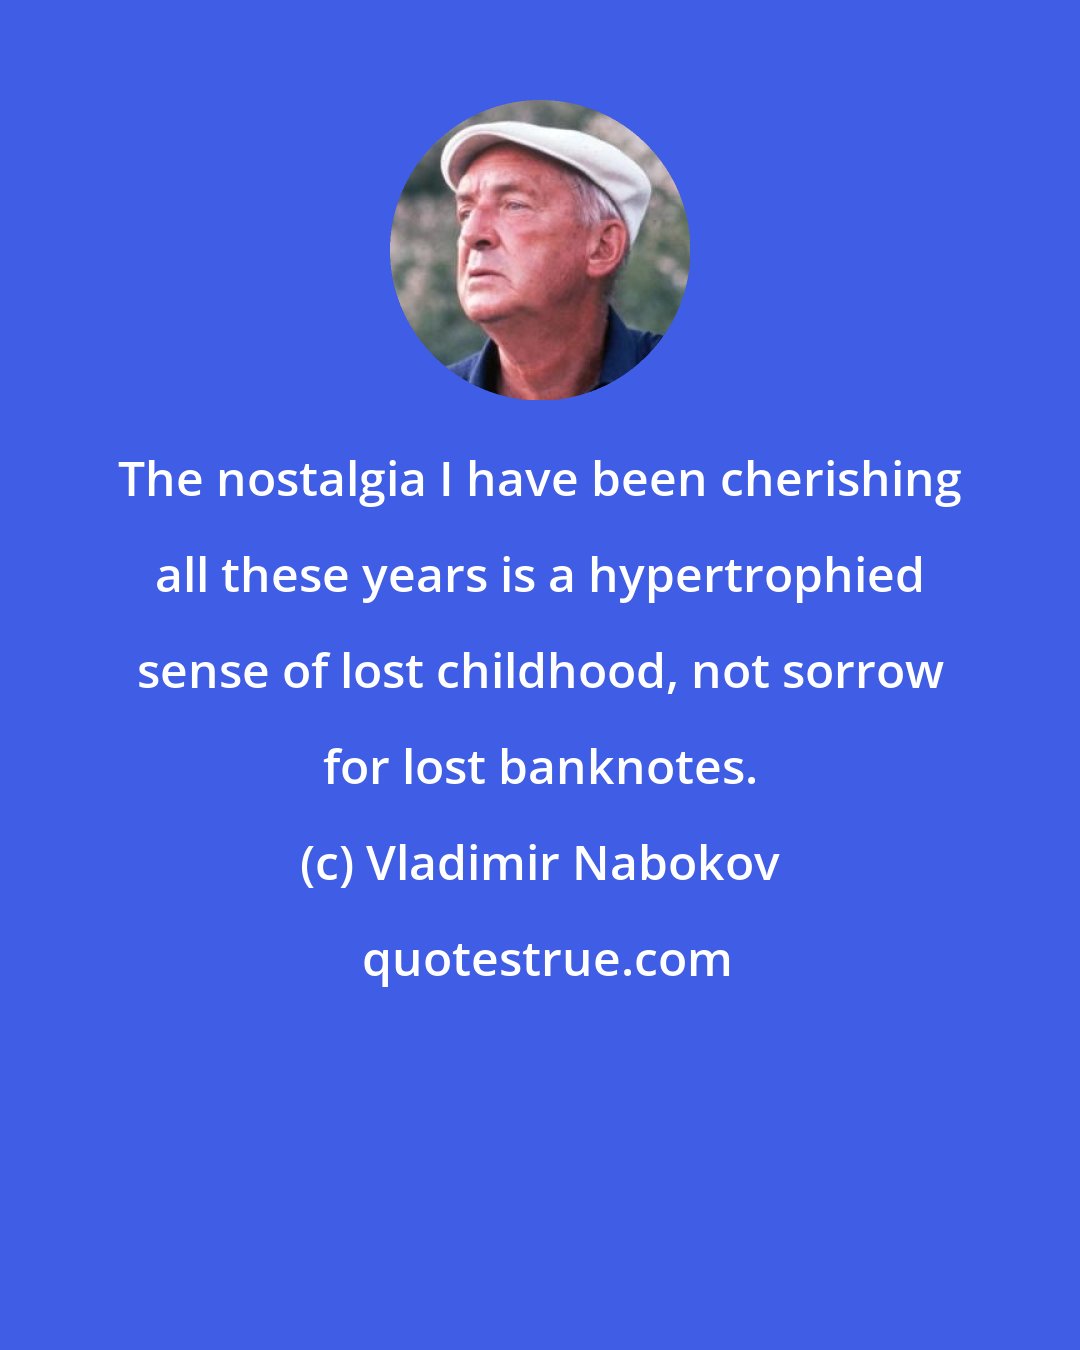 Vladimir Nabokov: The nostalgia I have been cherishing all these years is a hypertrophied sense of lost childhood, not sorrow for lost banknotes.